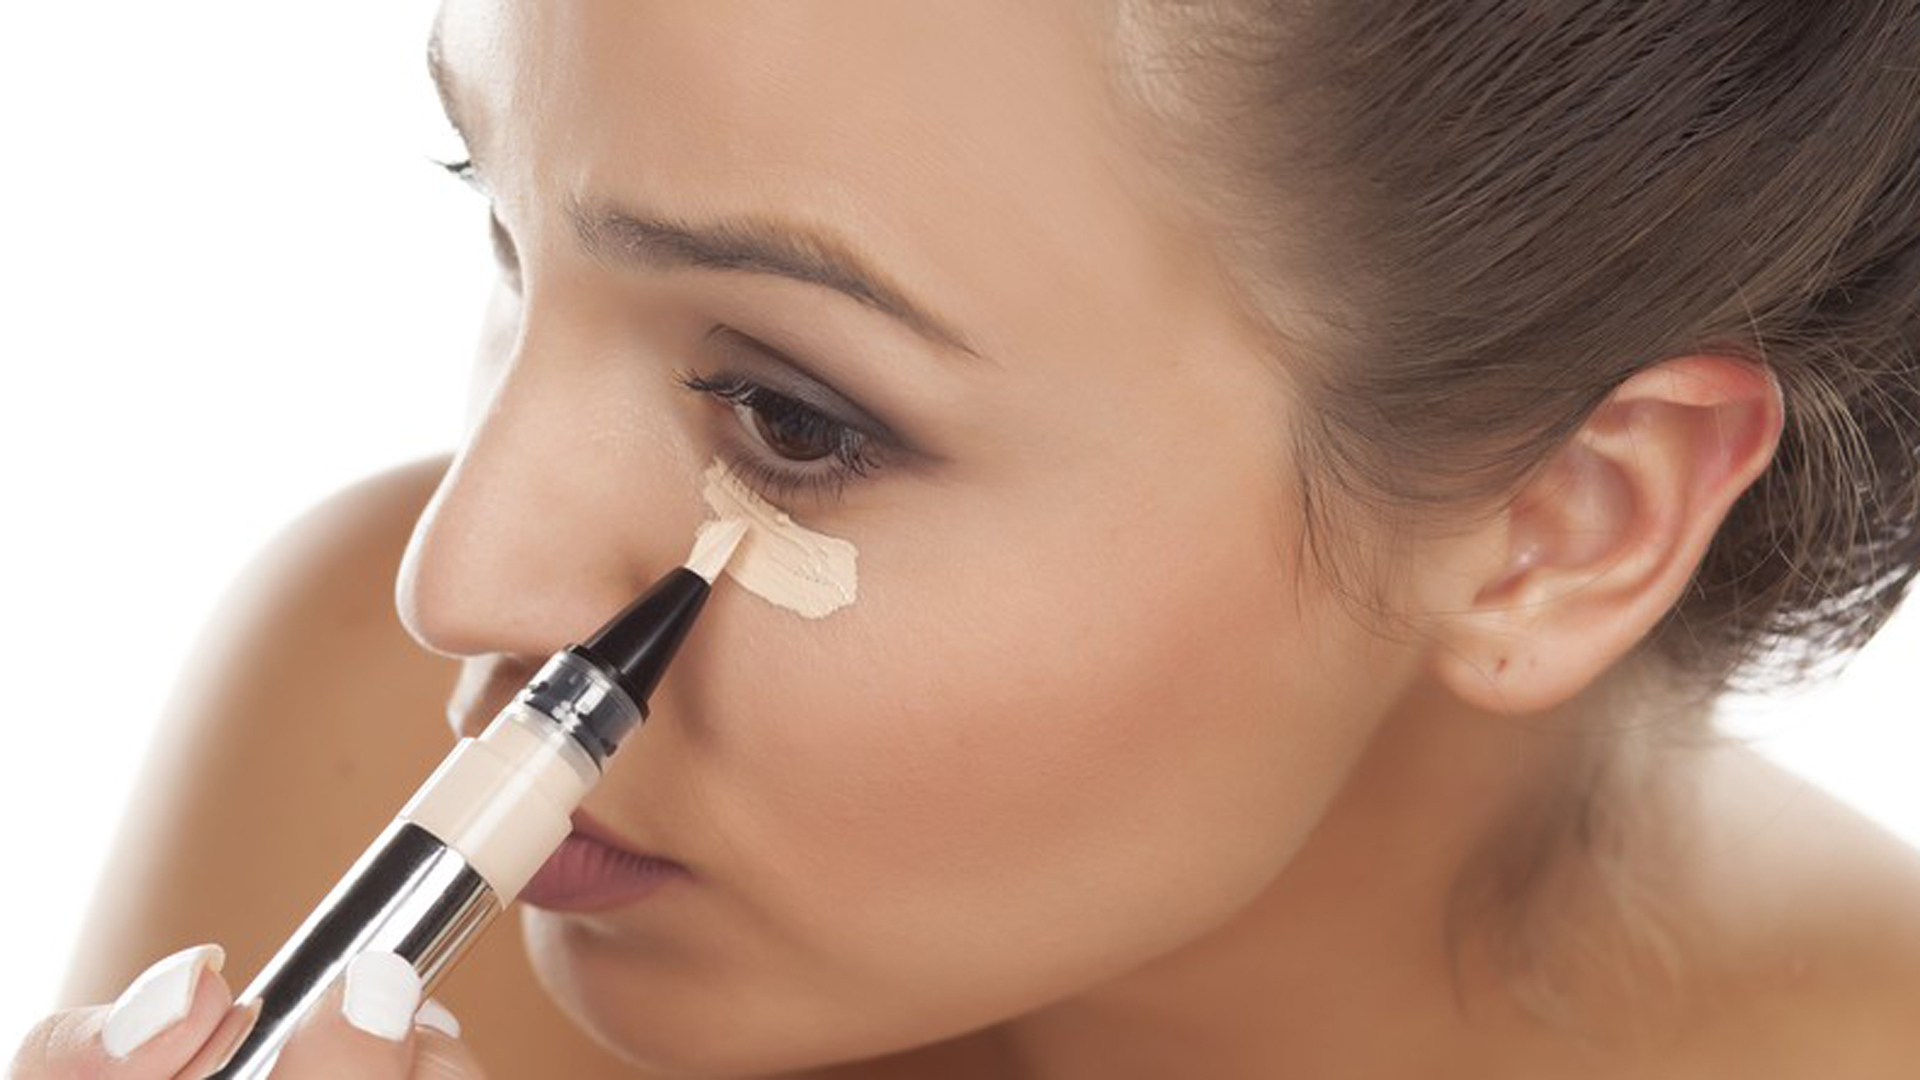 Best Under Eye Makeup How To Get Rid Of Under Eye Circles